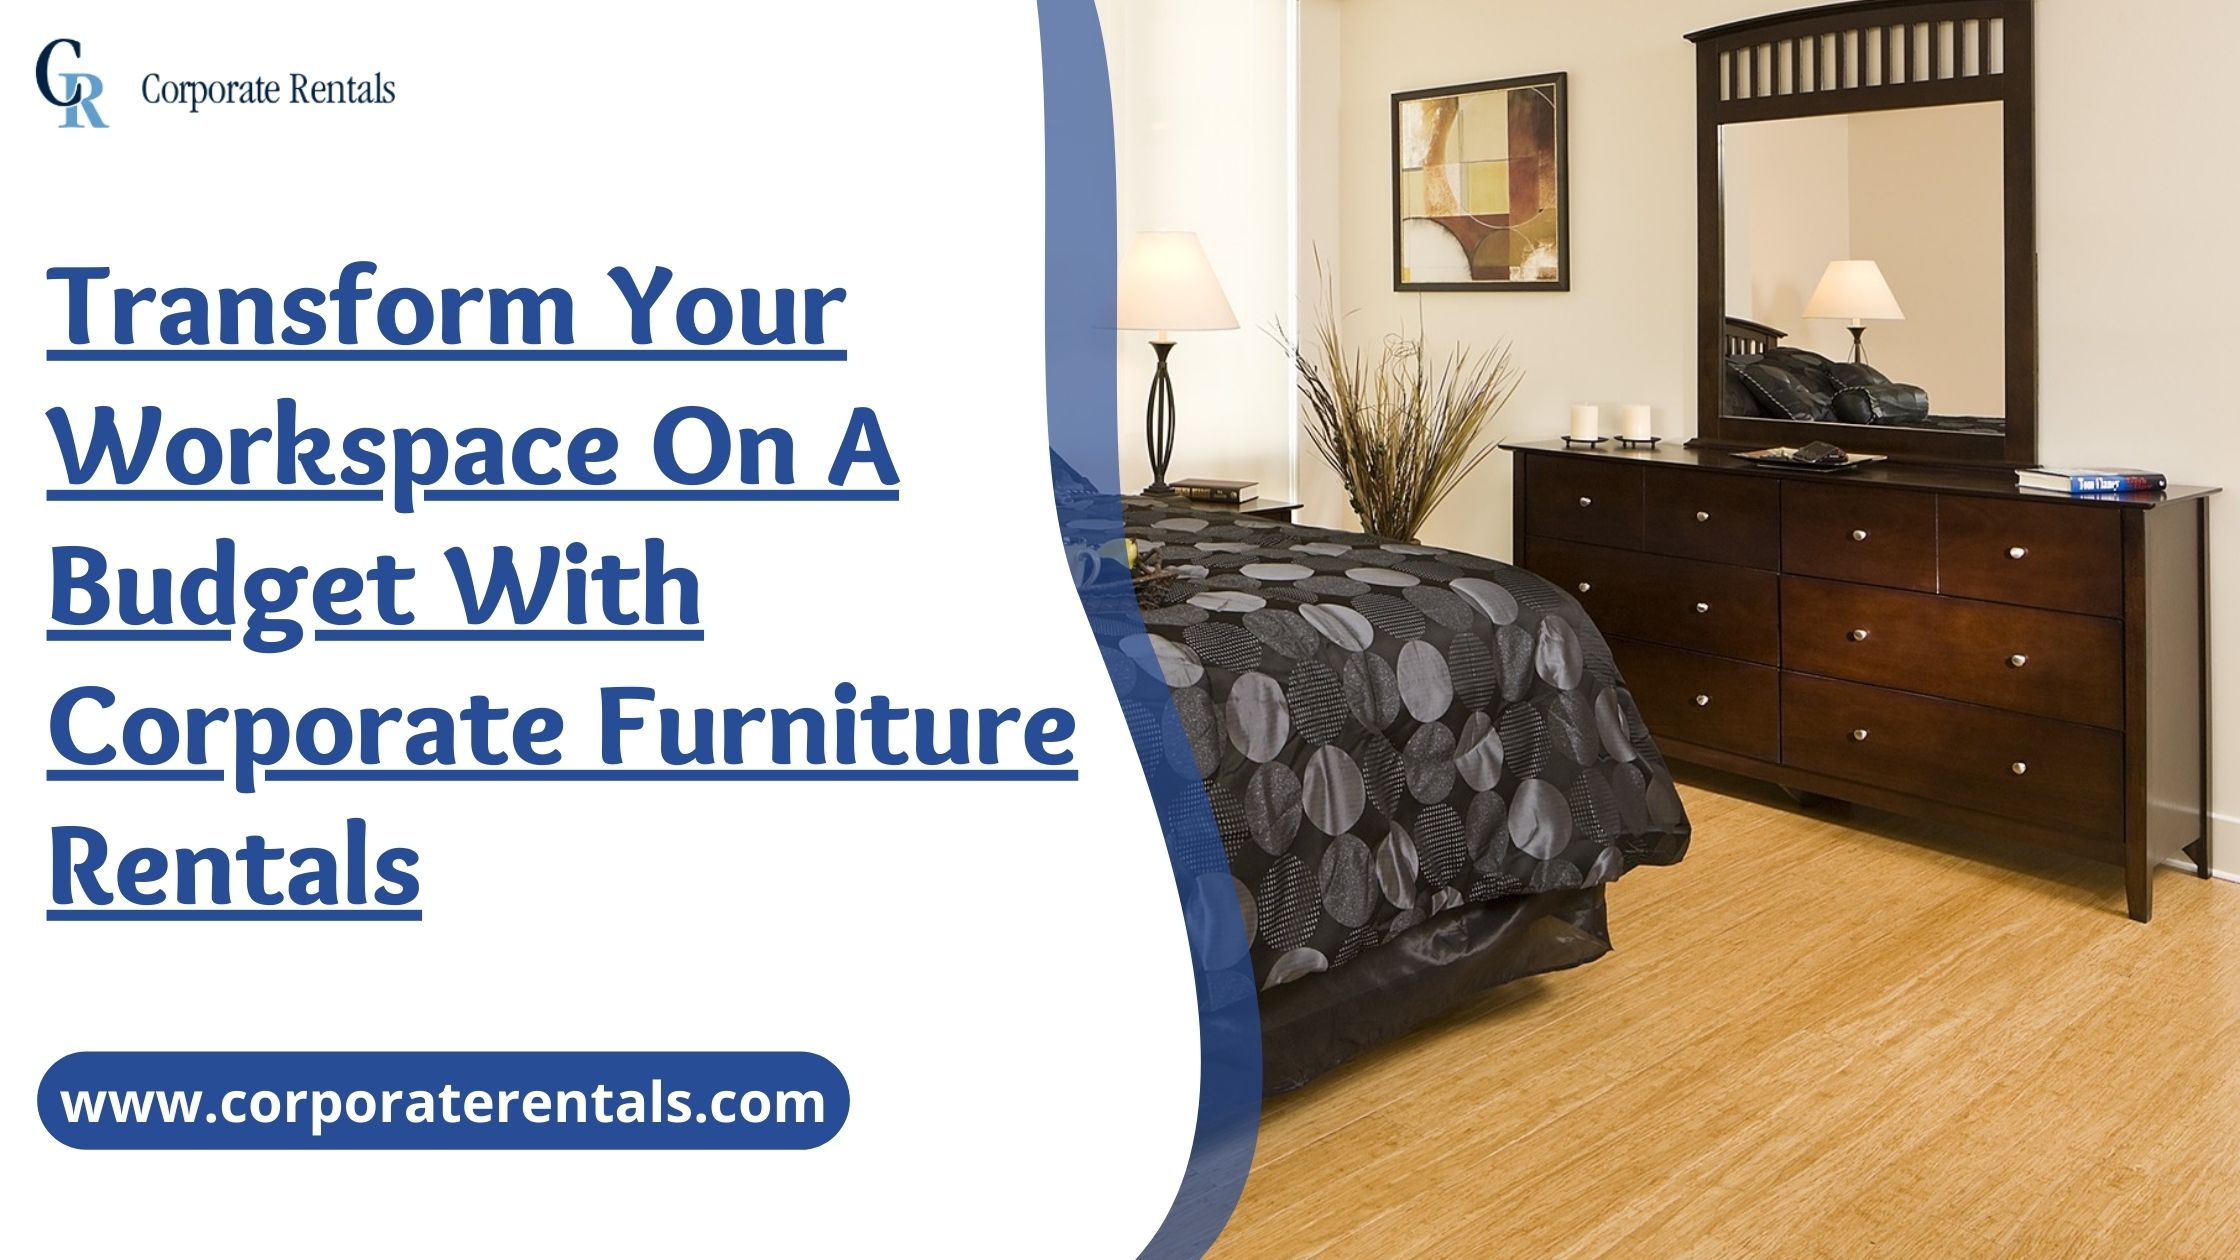 Transform Your Workspace on a Budget with Corporate Furniture Rentals